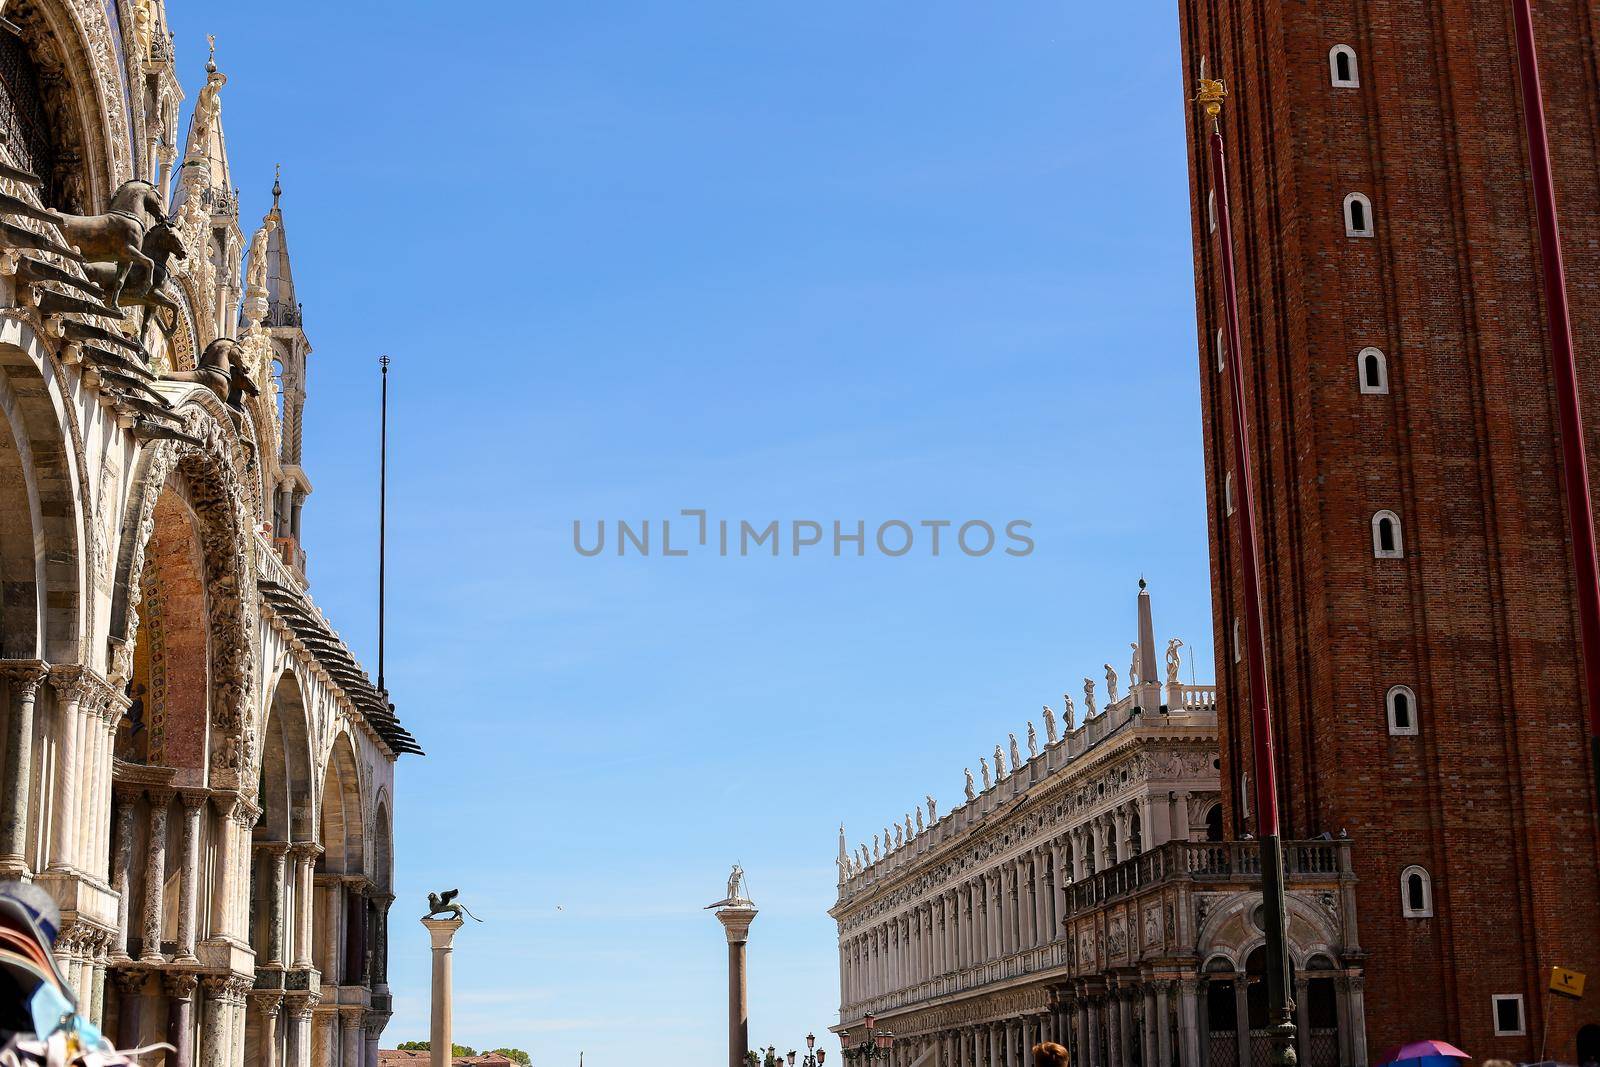 Exterior of Saint Mark Basilica and buildings. Concept of last minute tours to Venice and famous landmarks of Italy.